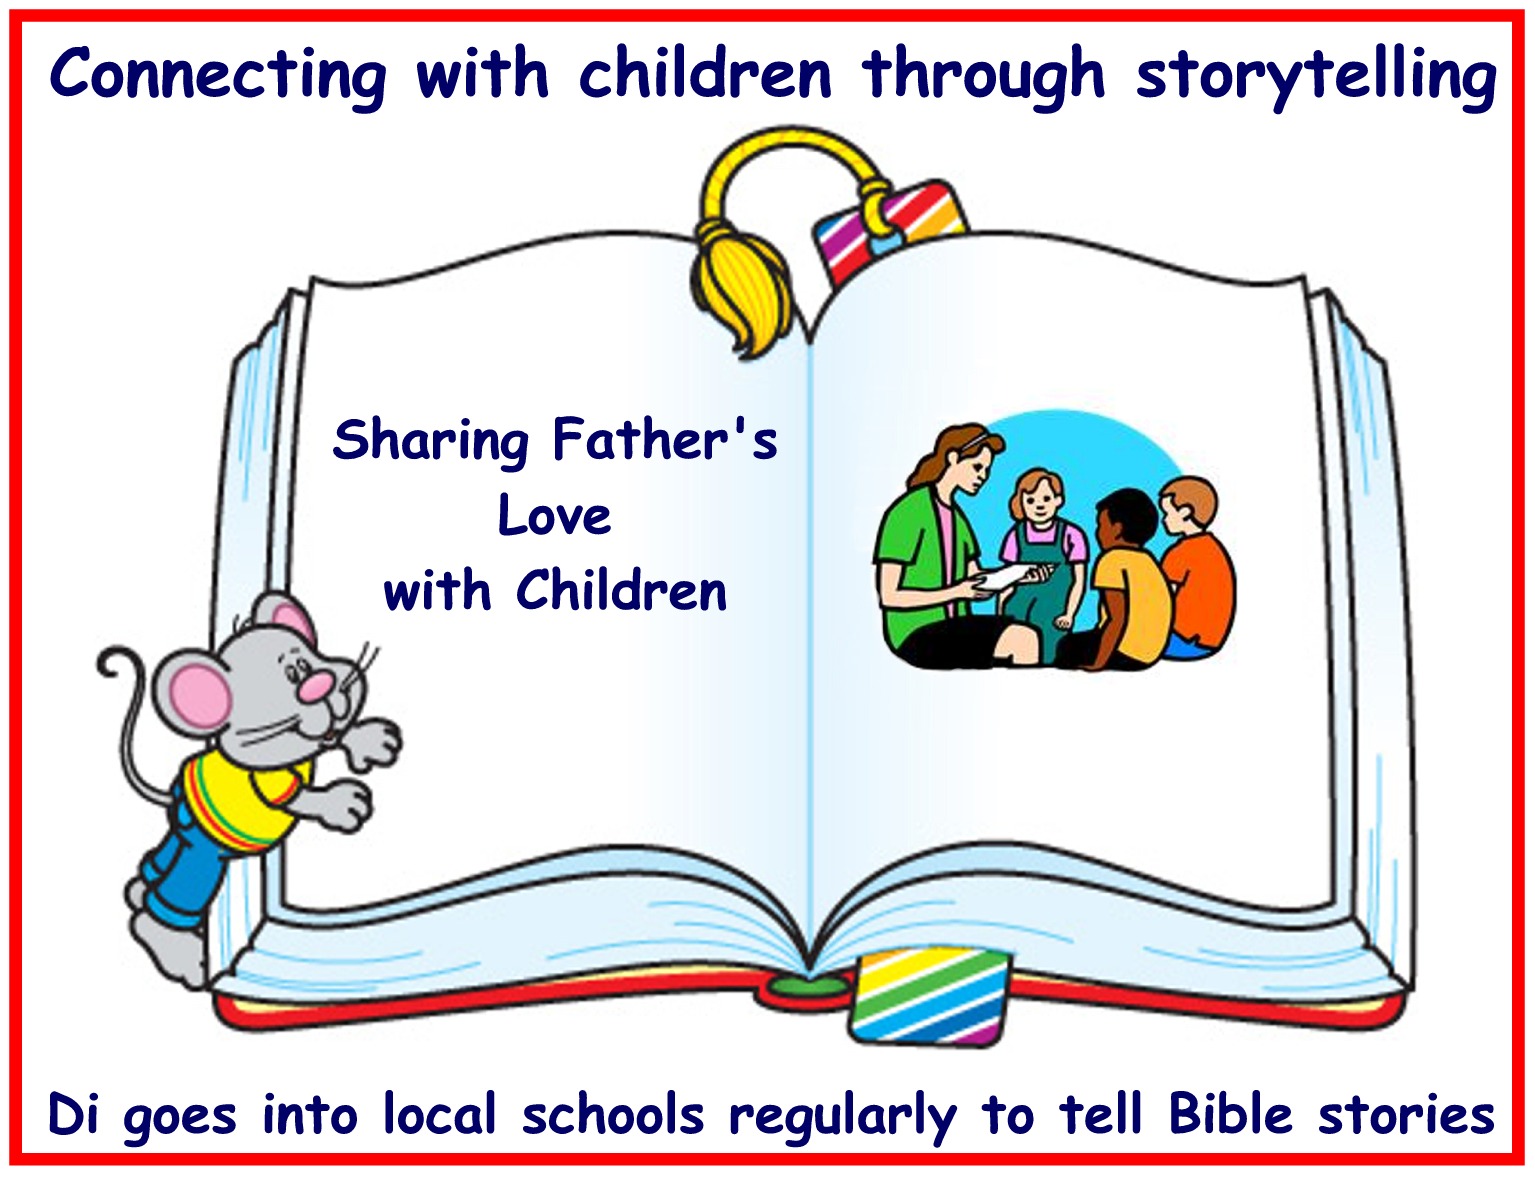 Seaford, Newhaven and Alfriston. Connecting to children through story telling. Di goes into local schools regularly to tell bible stories